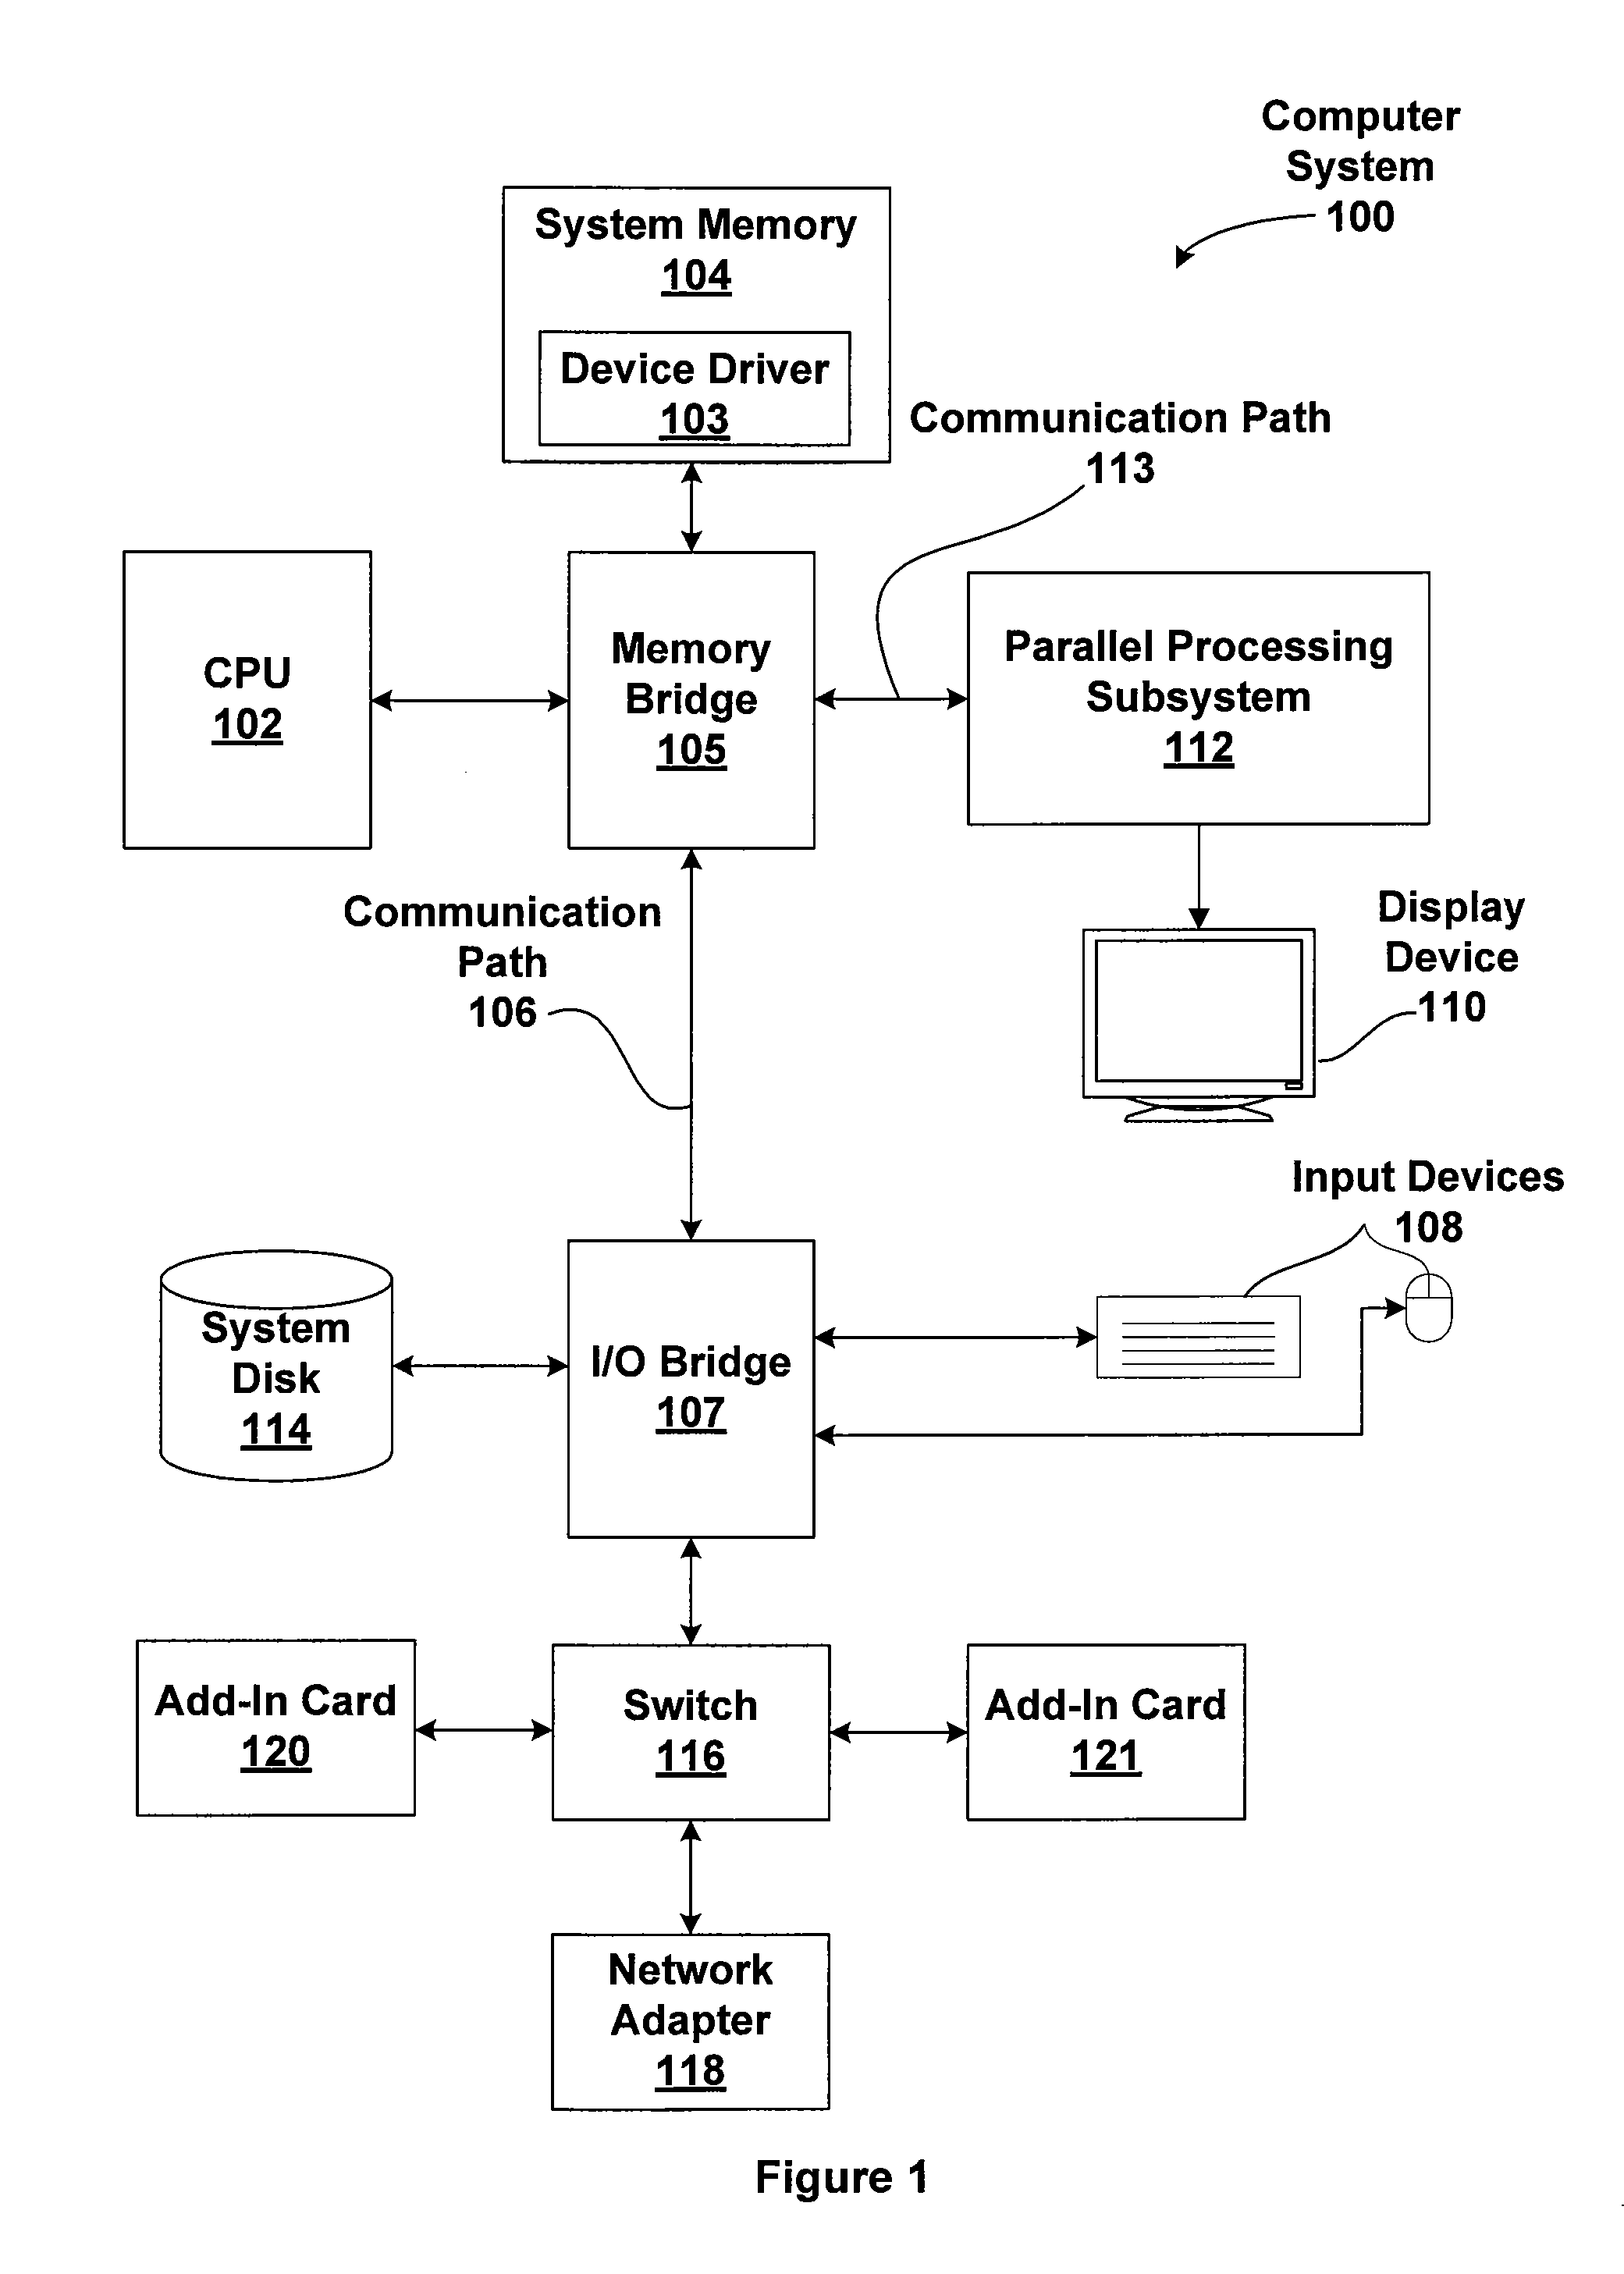 Efficient memory virtualization in multi-threaded processing units